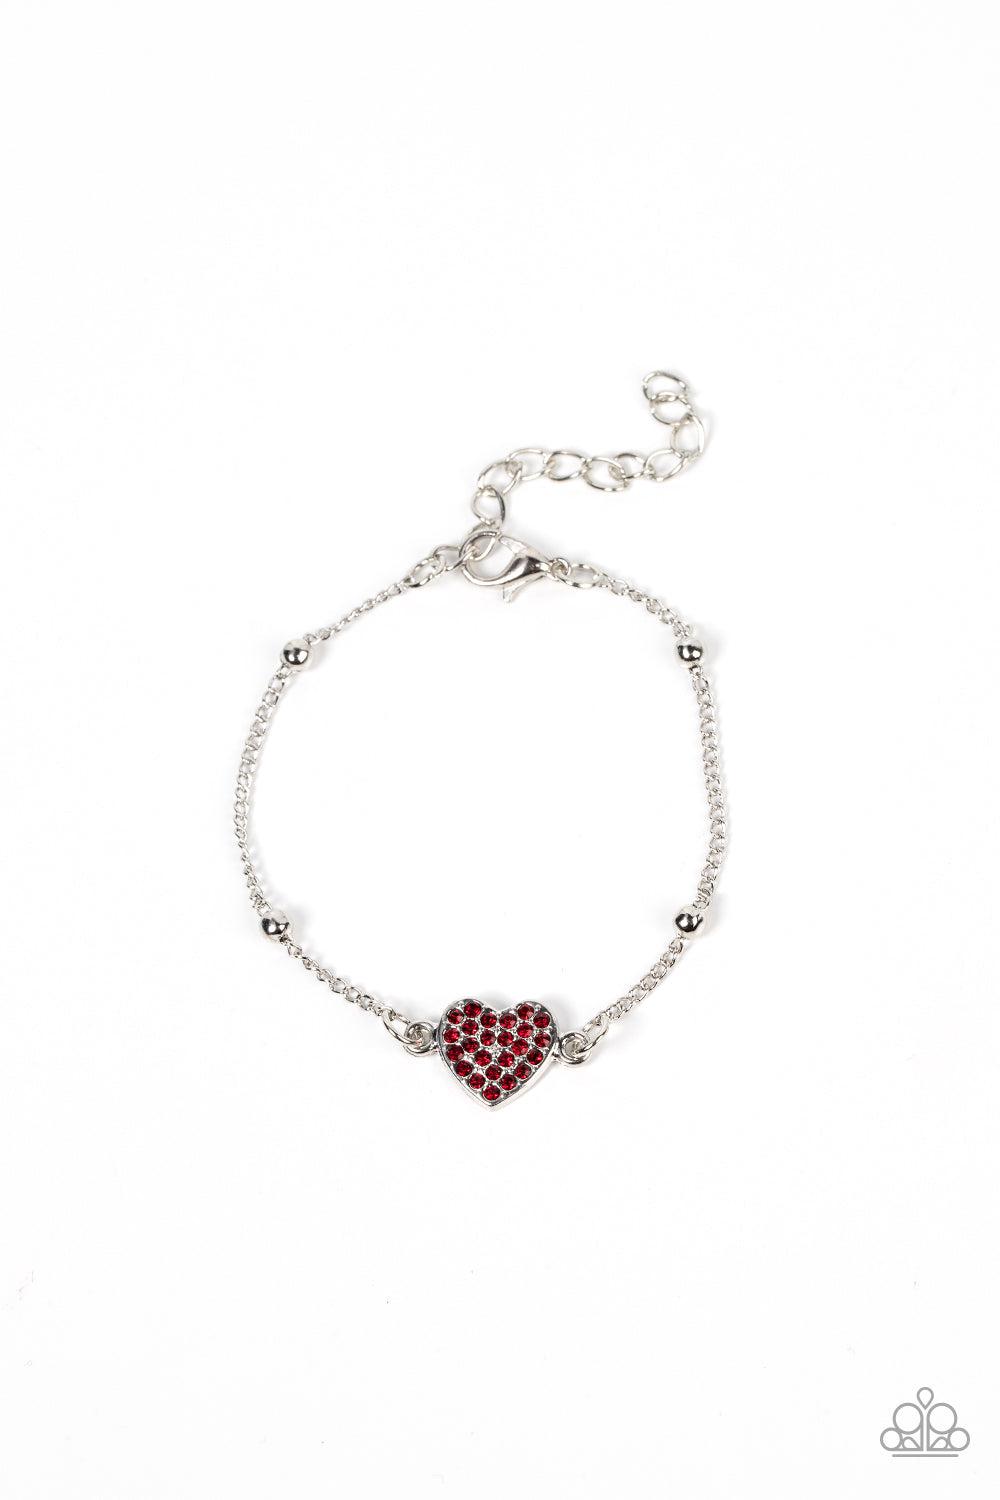 Heartachingly Adorable Red Rhinestone Heart Bracelet - Paparazzi Accessories- lightbox - CarasShop.com - $5 Jewelry by Cara Jewels